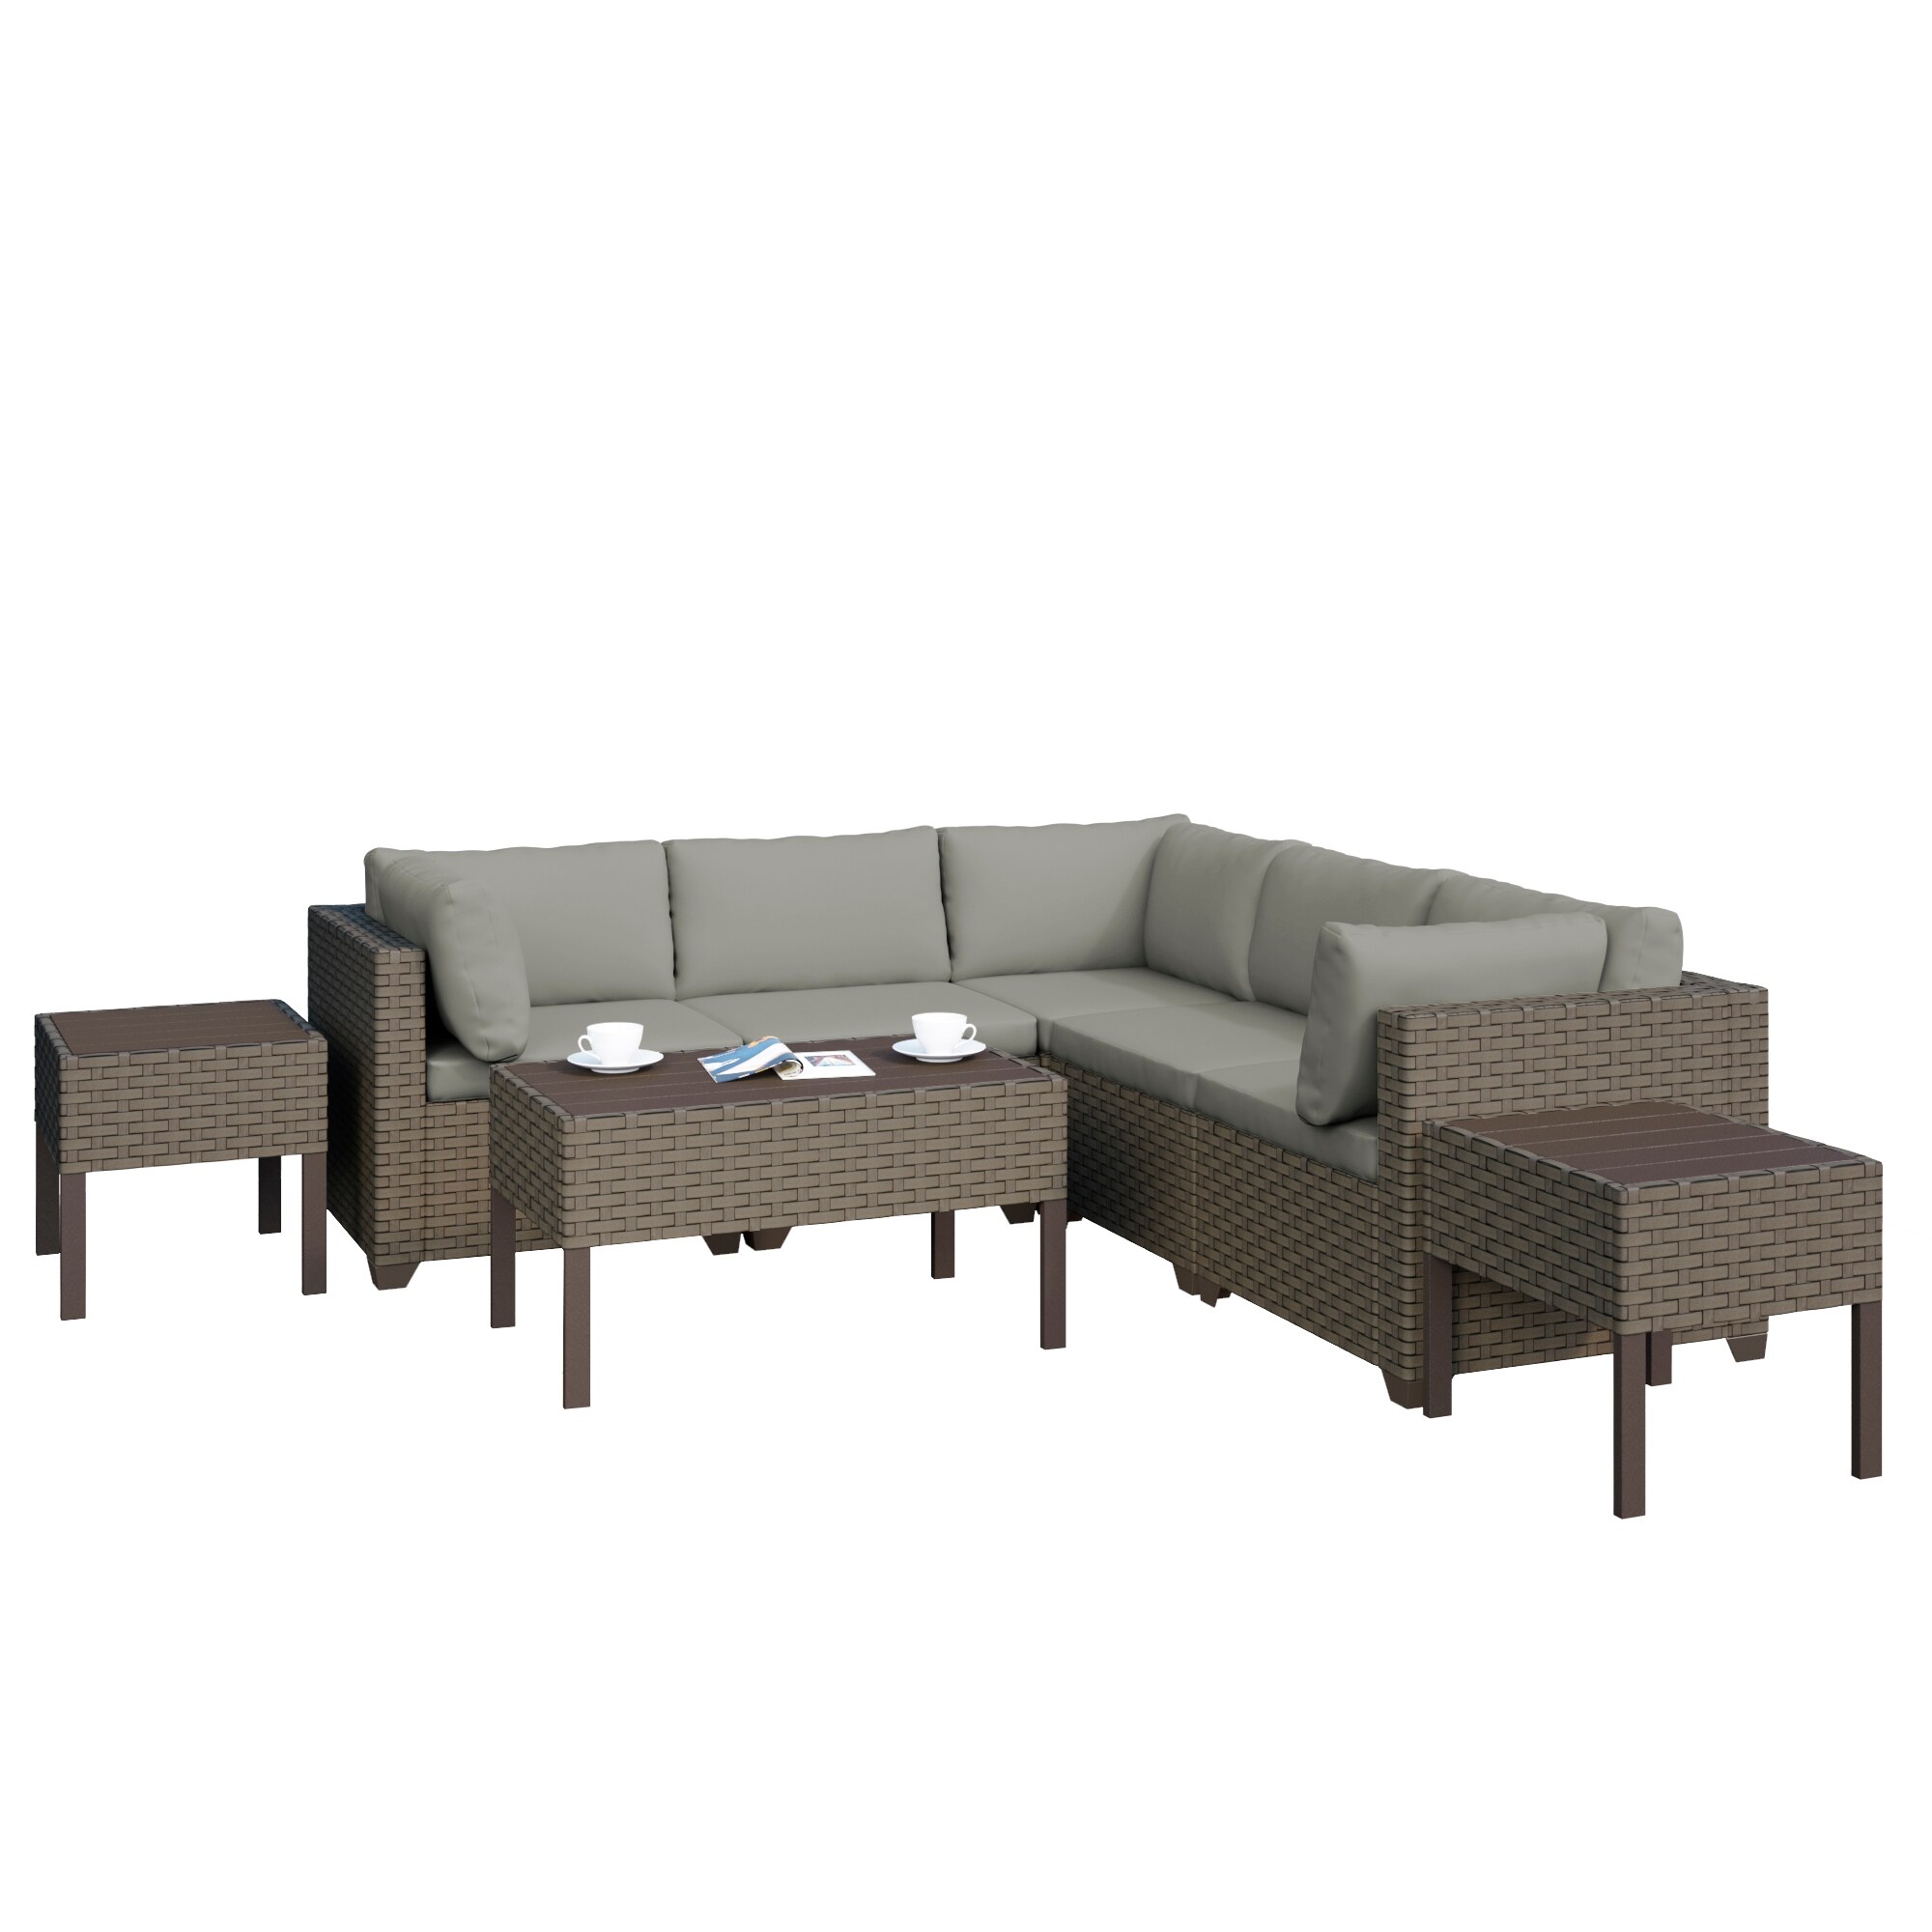 Keys 8-piece Outdoor Conversation Set With Coffee Table And Two End Tables In Summer Fog Wicker